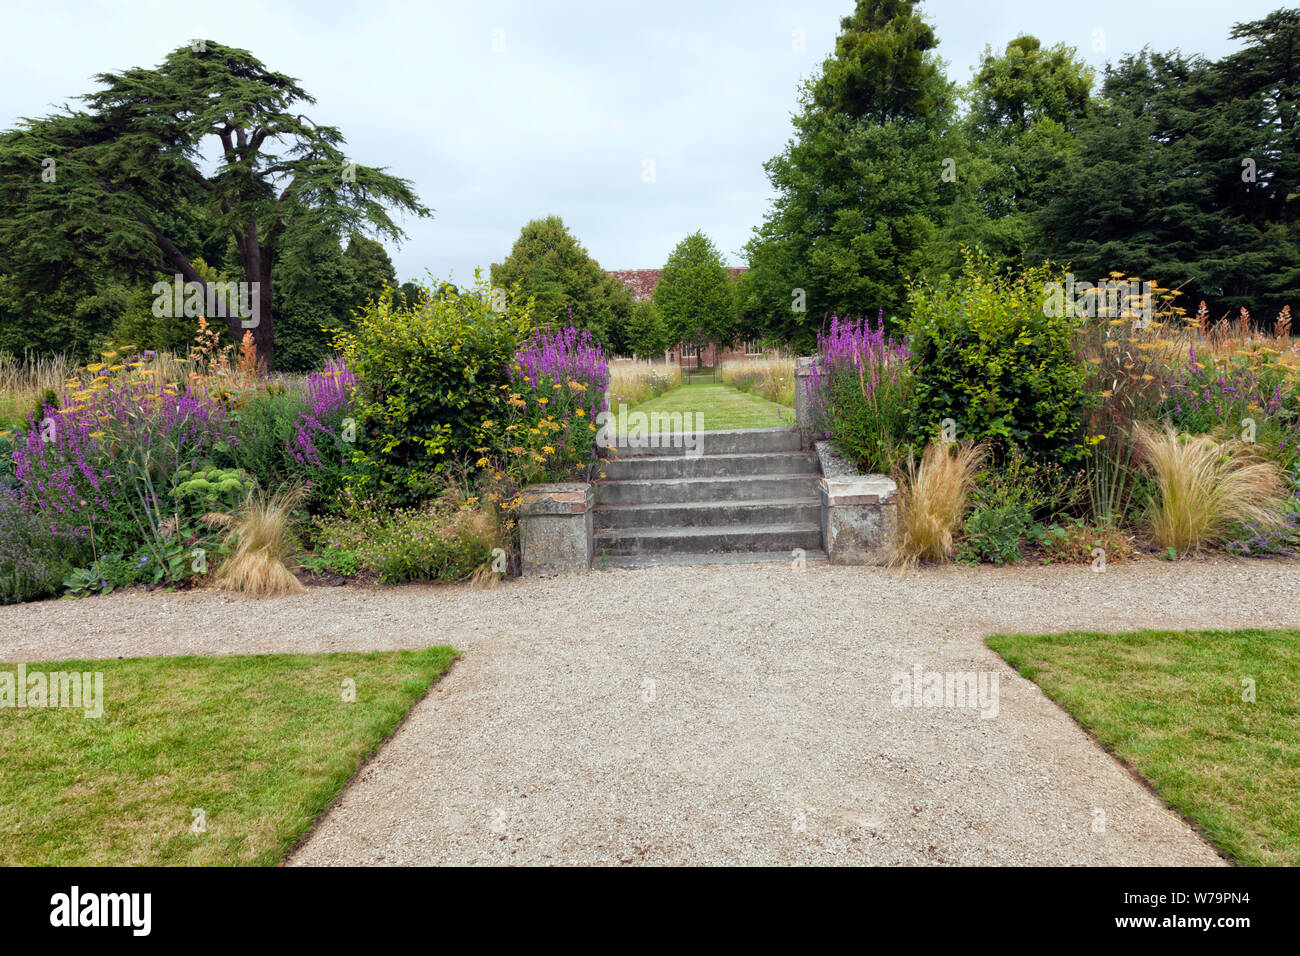 Summer garden with stone path leading to a staircase to wild flower meadow, surrounded by mature trees . Stock Photo